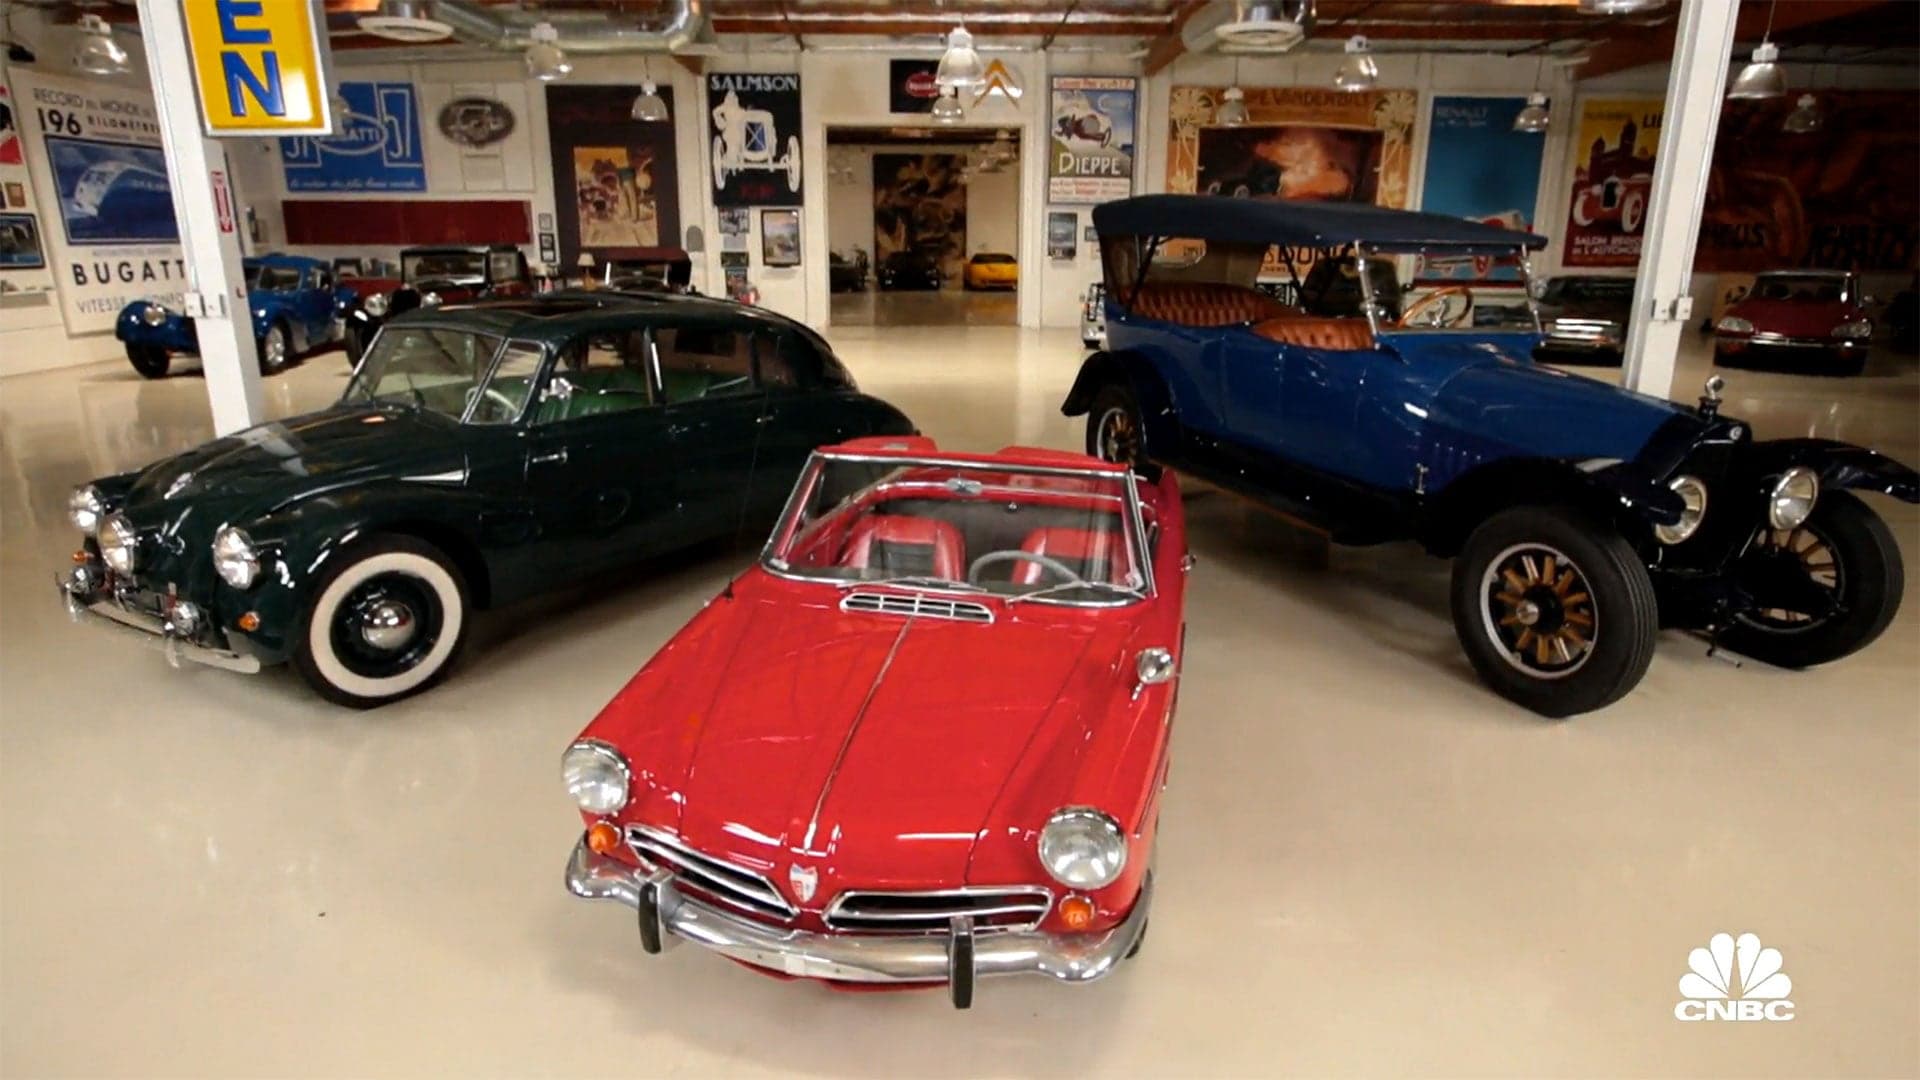 9 Interesting Things From Jay Leno’s Garage, Episode 8